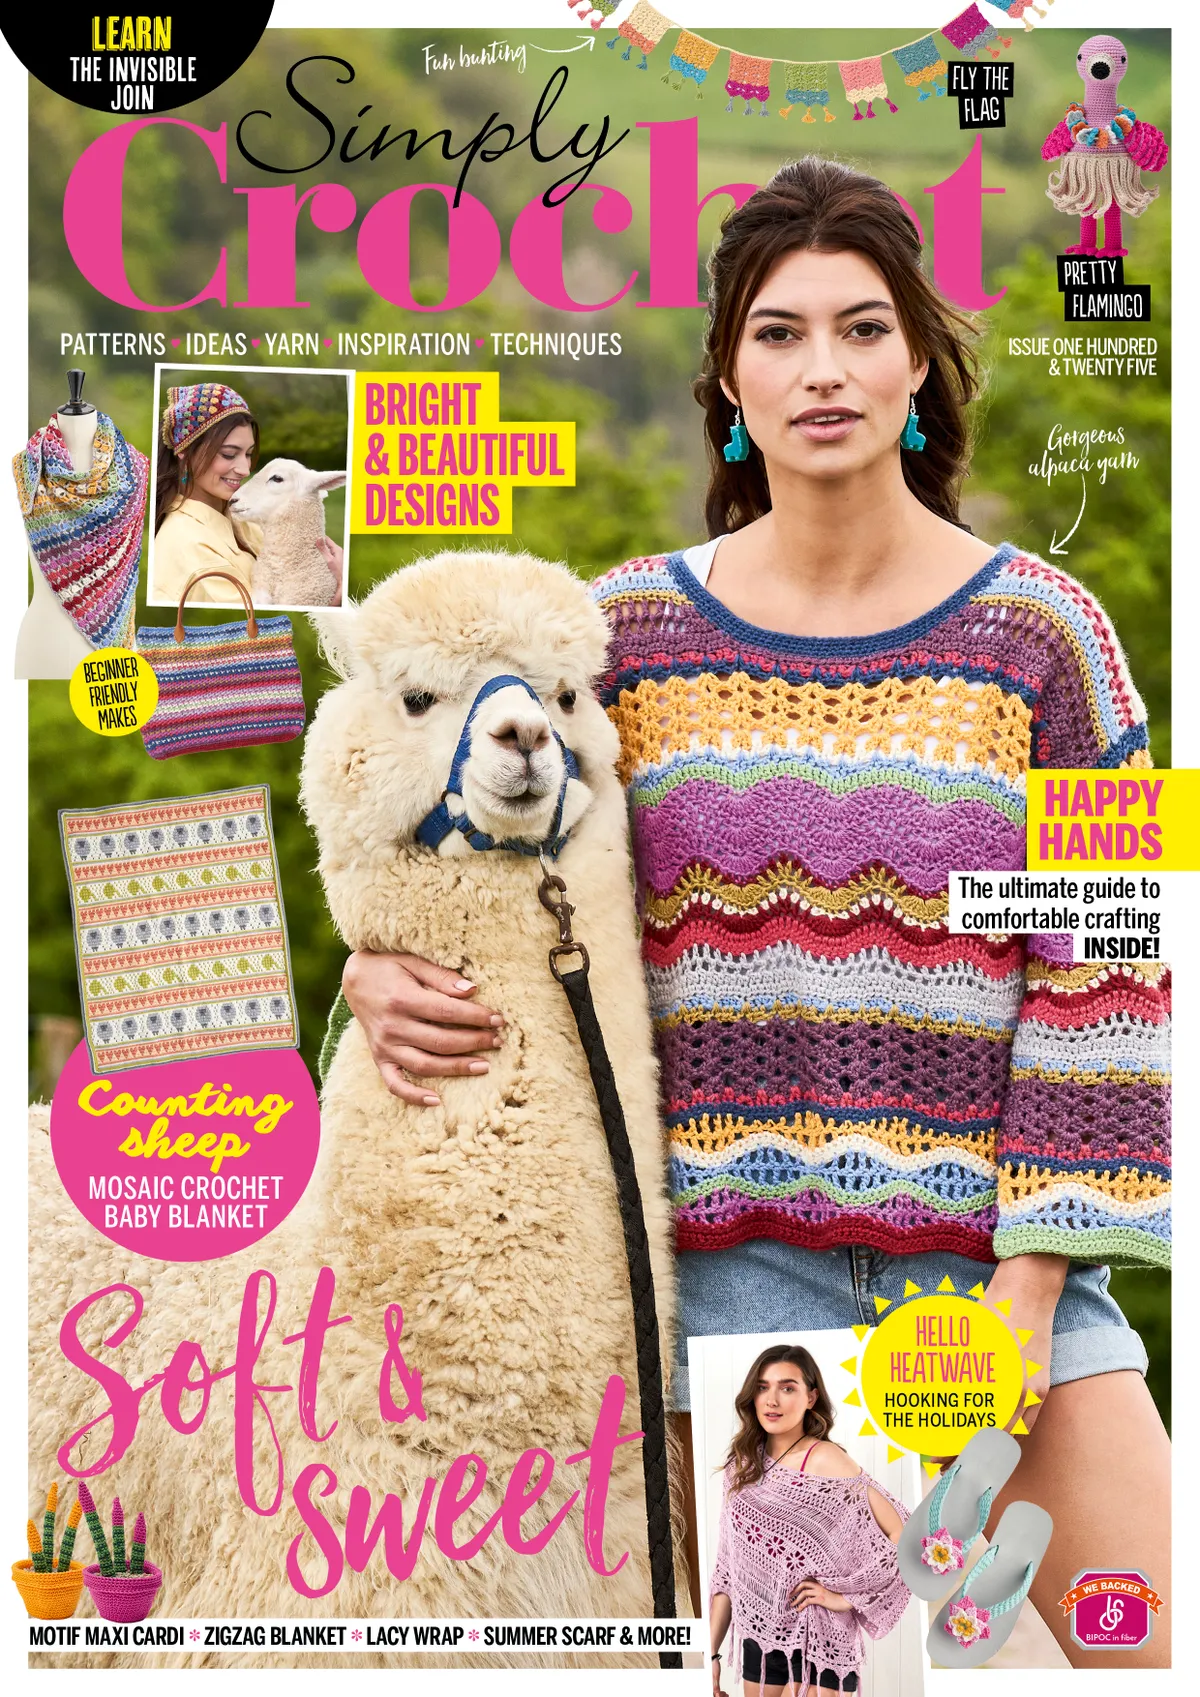 Simply Crochet issue 125 cover